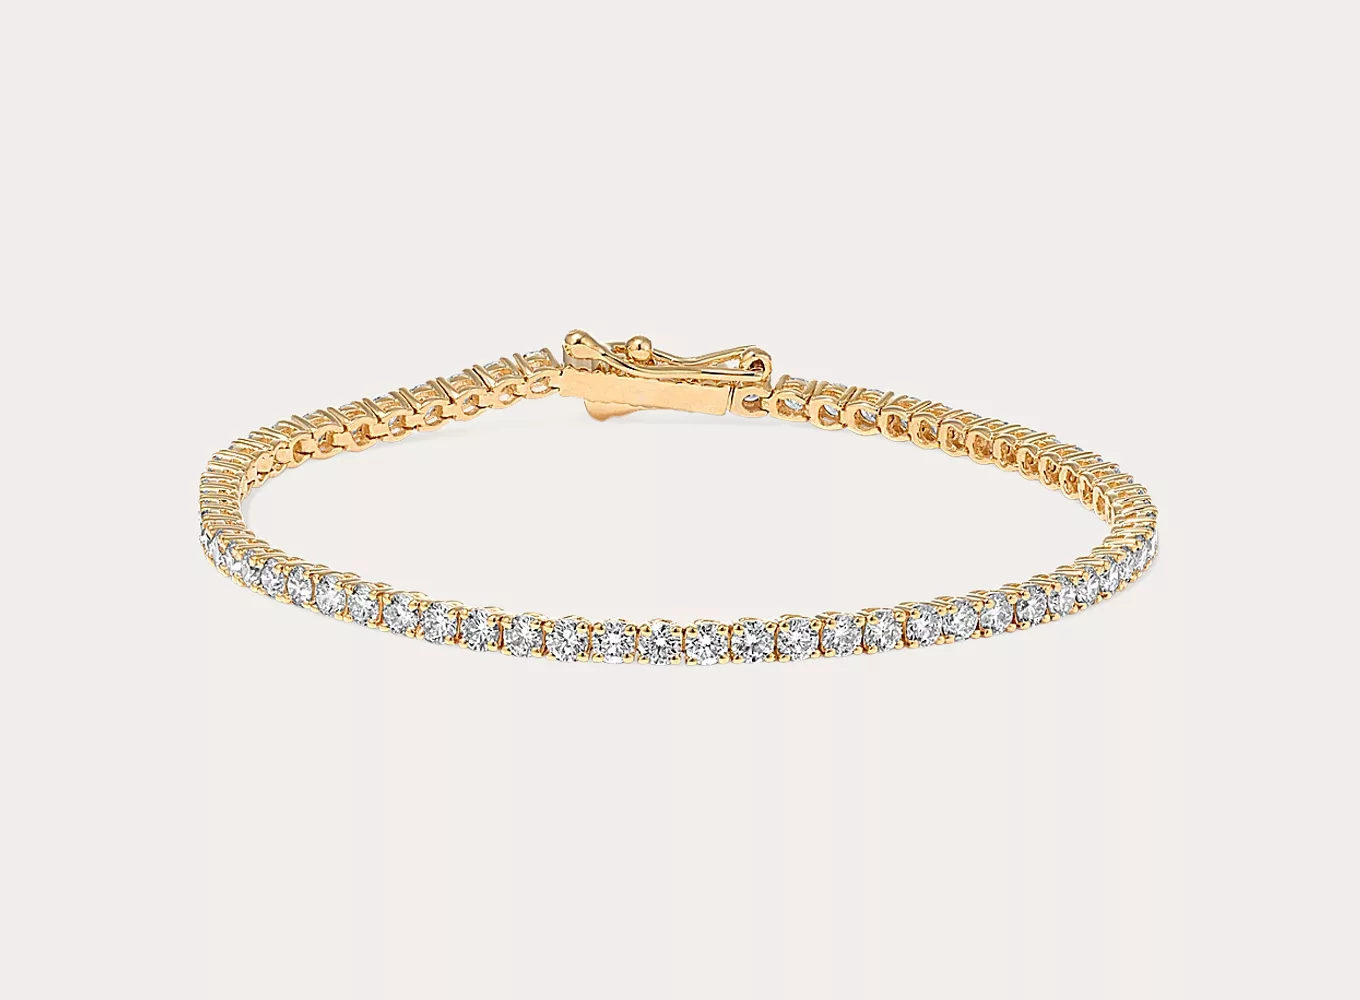 2 1/2 Diamond Tennis Bracelet (8 in) Leave them speechless with this natural diamond tennis bracelet. Set in bright 14-karat yellow gold, the hand-matched diamonds will sparkle from across the room. A secure box clasp and figure-eight safety latch offer worry-free wear.